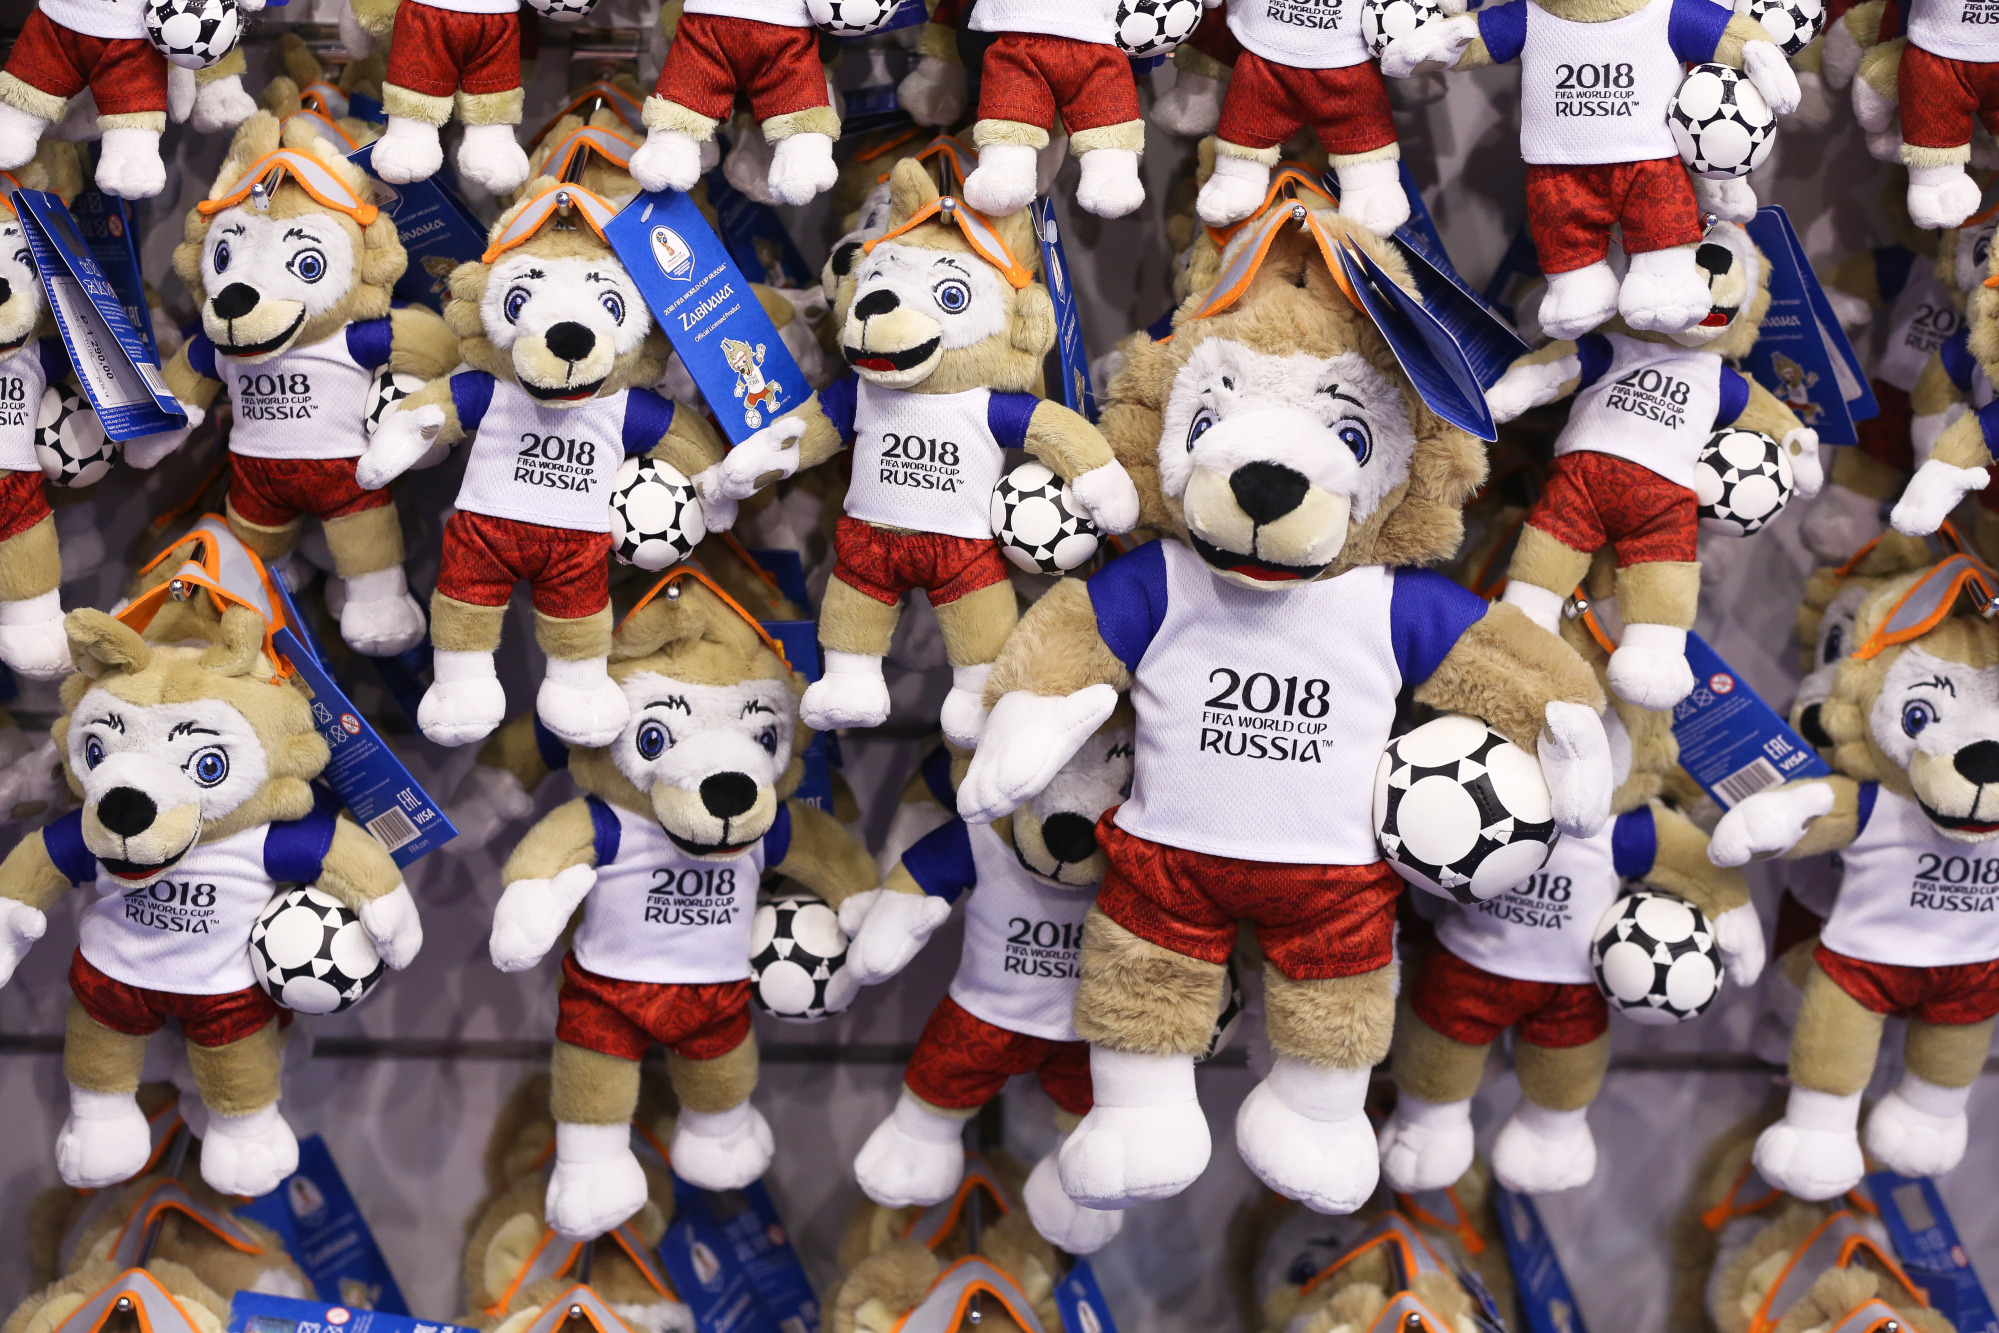 FIFA kicks Russia out of the World Cup – POLITICO